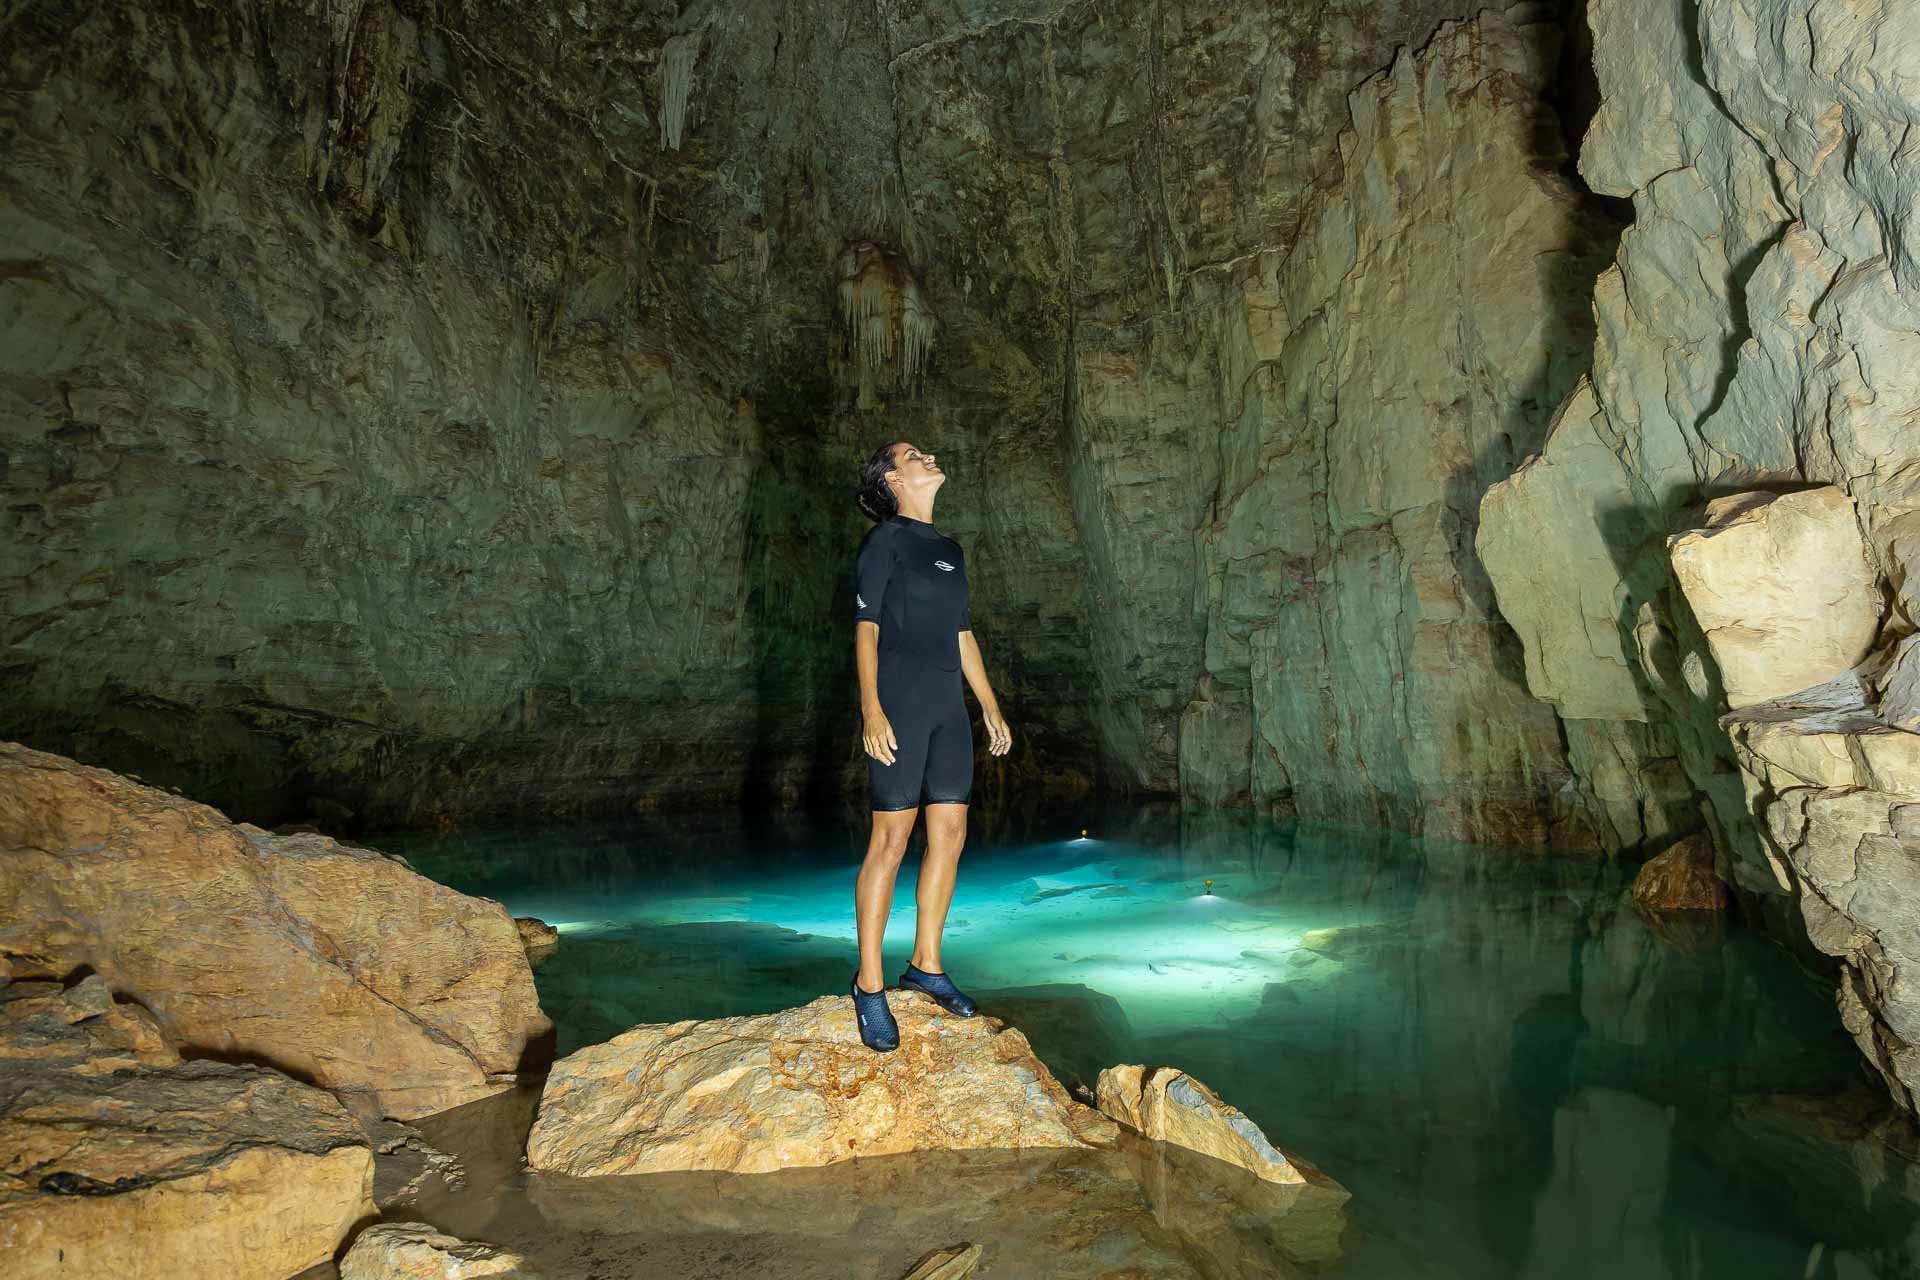 Fernanda in the middle and on top of a rock inside a cave with crystal blue water behind